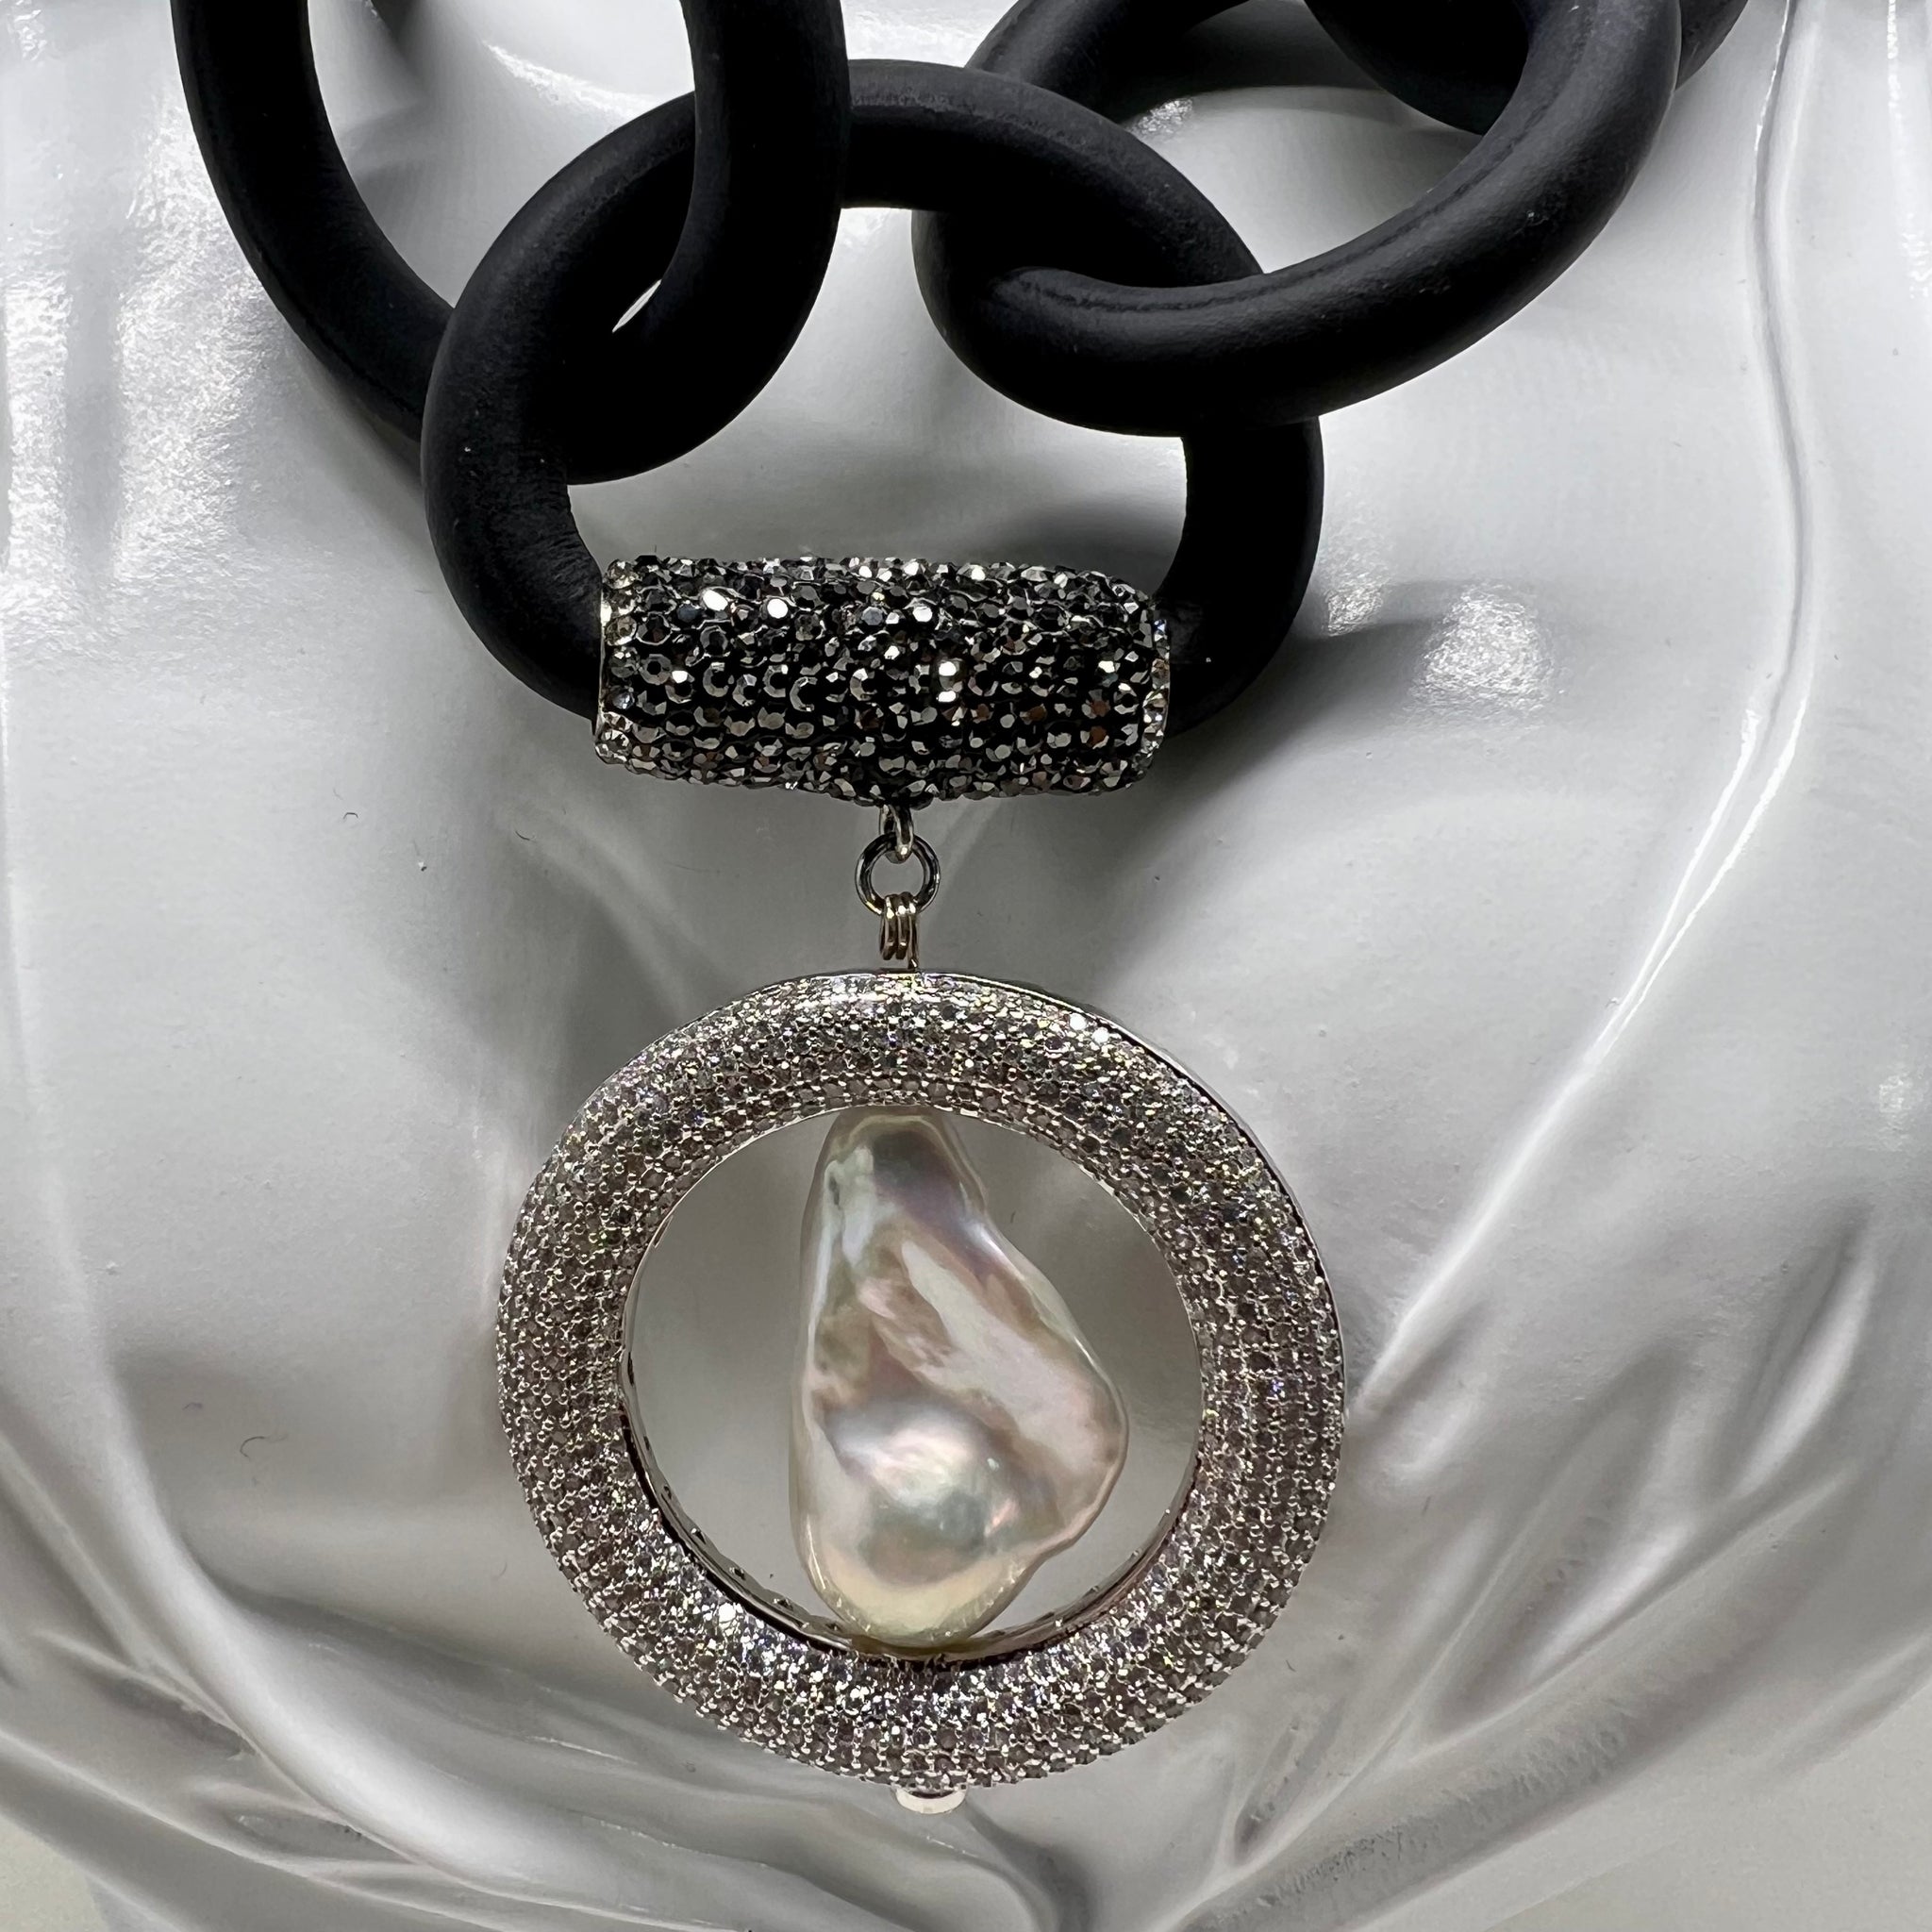 BLACK RUBBER NECKLACE WITH GENUINE LARGE BAROQUE PEARL SET INSIDE A PAVE'S CZ CIRCLE PENDENT. by nyet jewelry